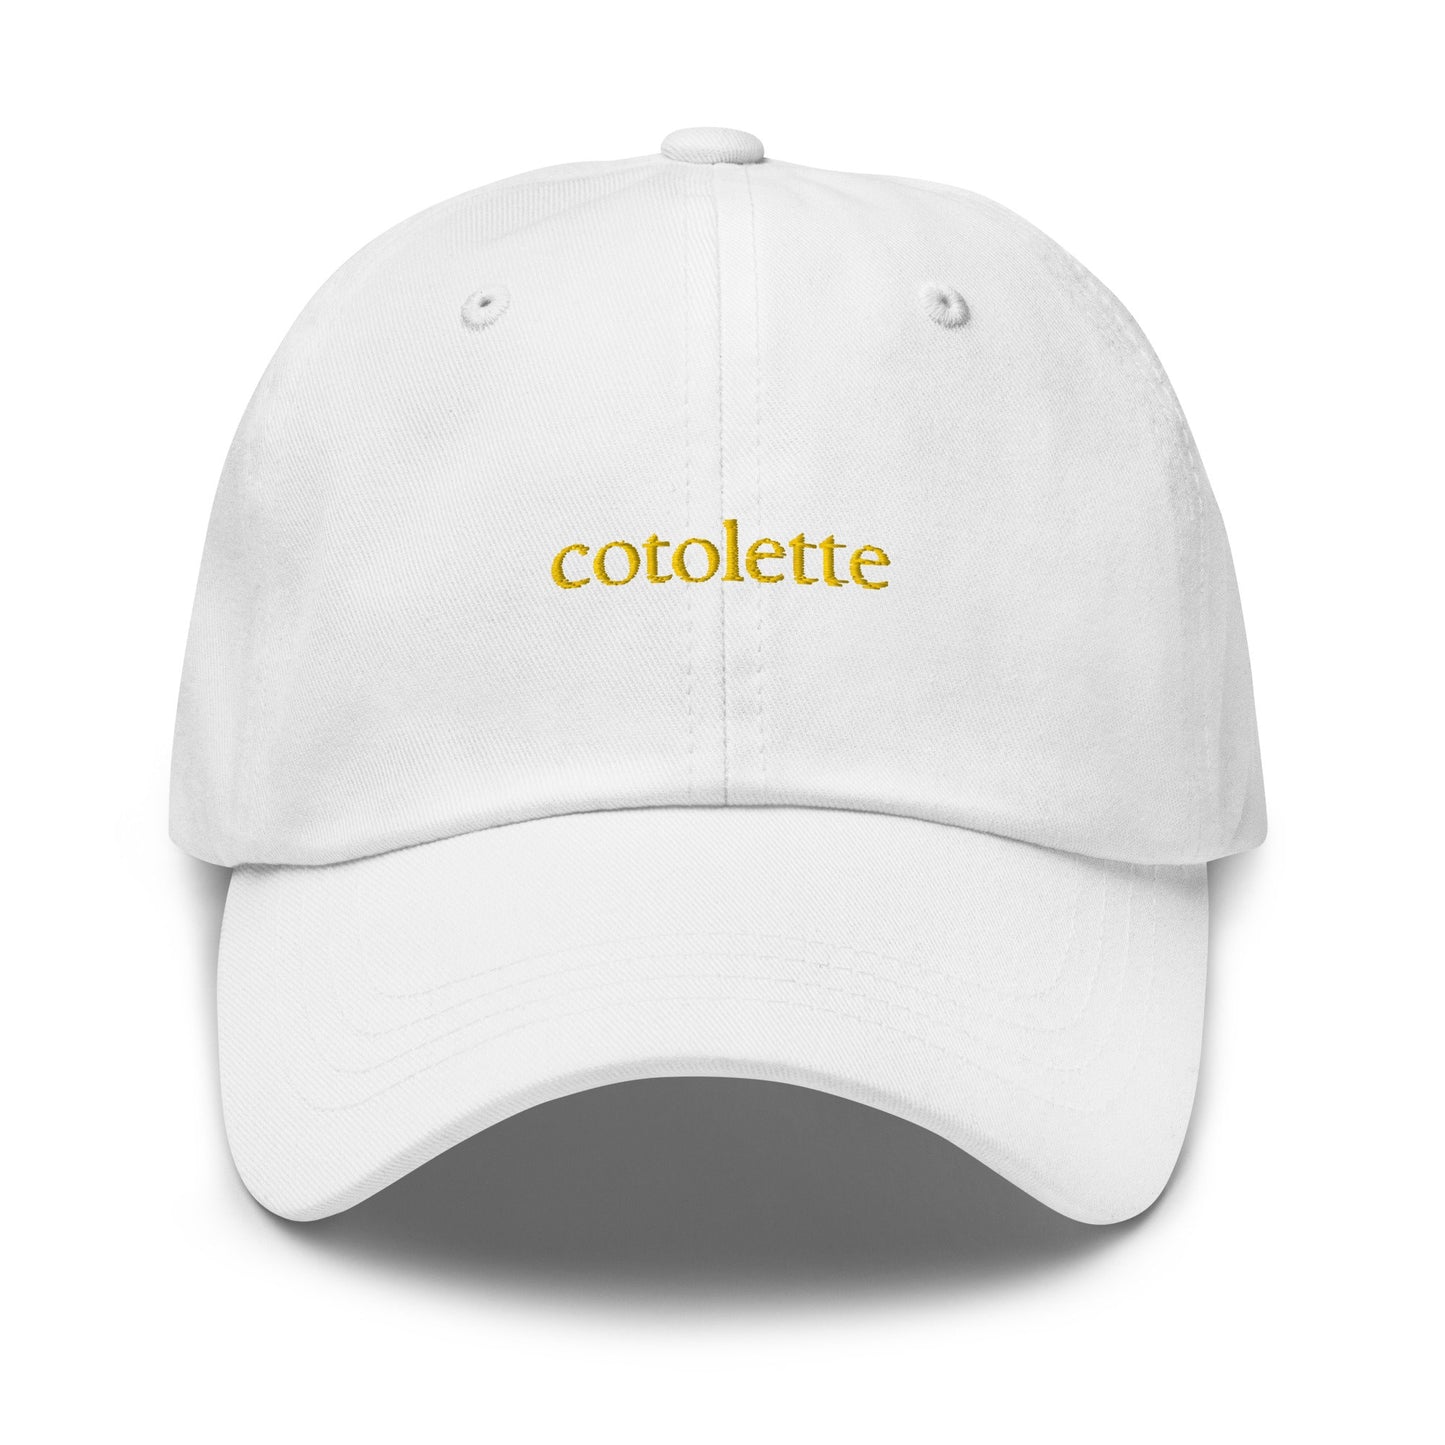 Cotolette Dad Hat - Gift for Italian pasta lovers - Cotton embroidered Cap